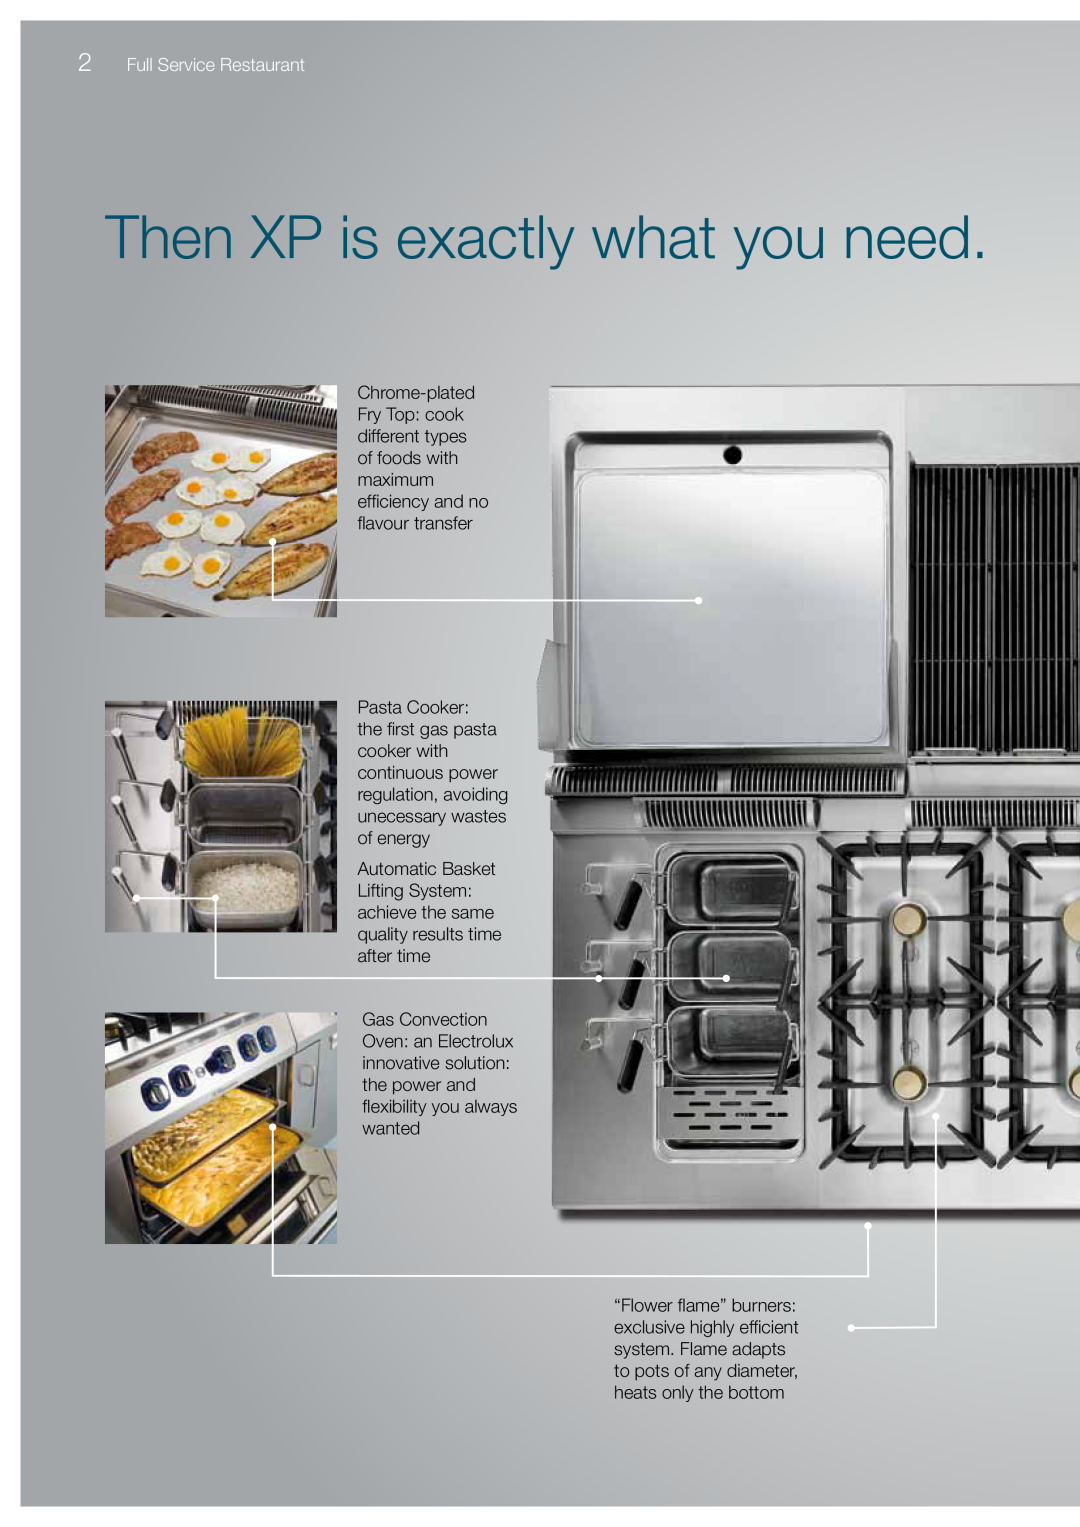 Electrolux 900XP, 700XP manual Then XP is exactly what you need, Full Service Restaurant 